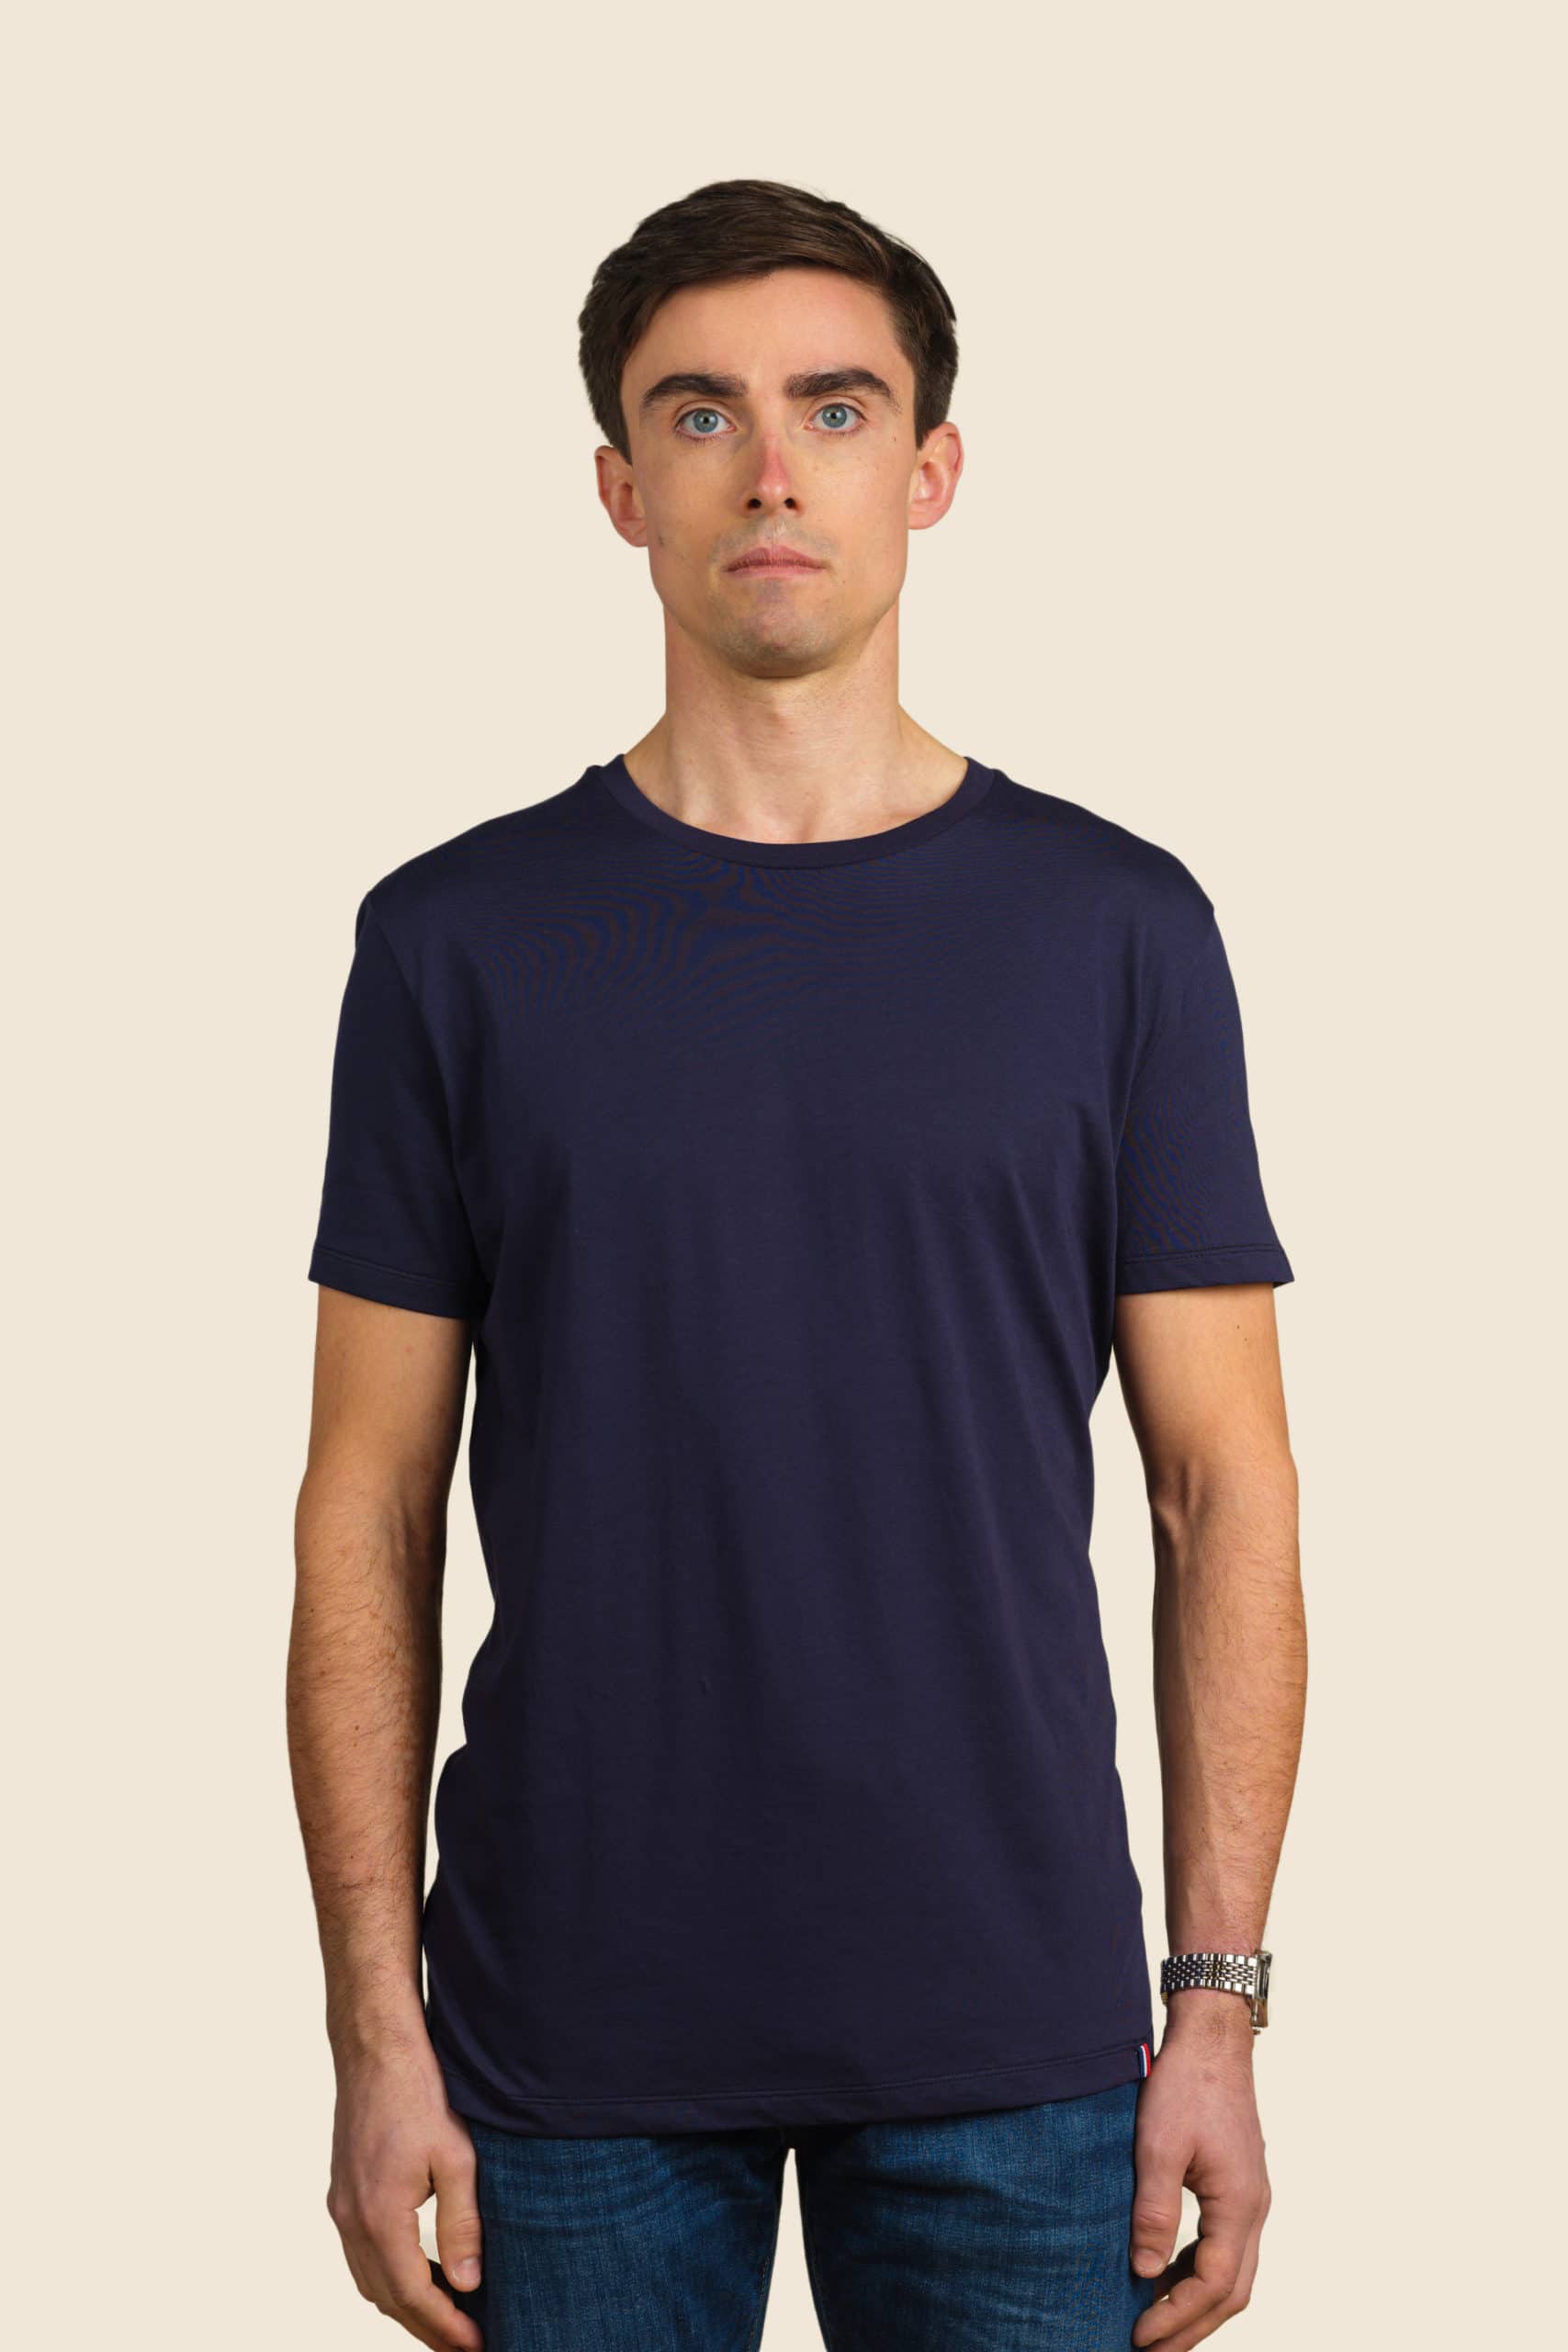 t-shirt bleu homme made in france personnalisable - Icone Design